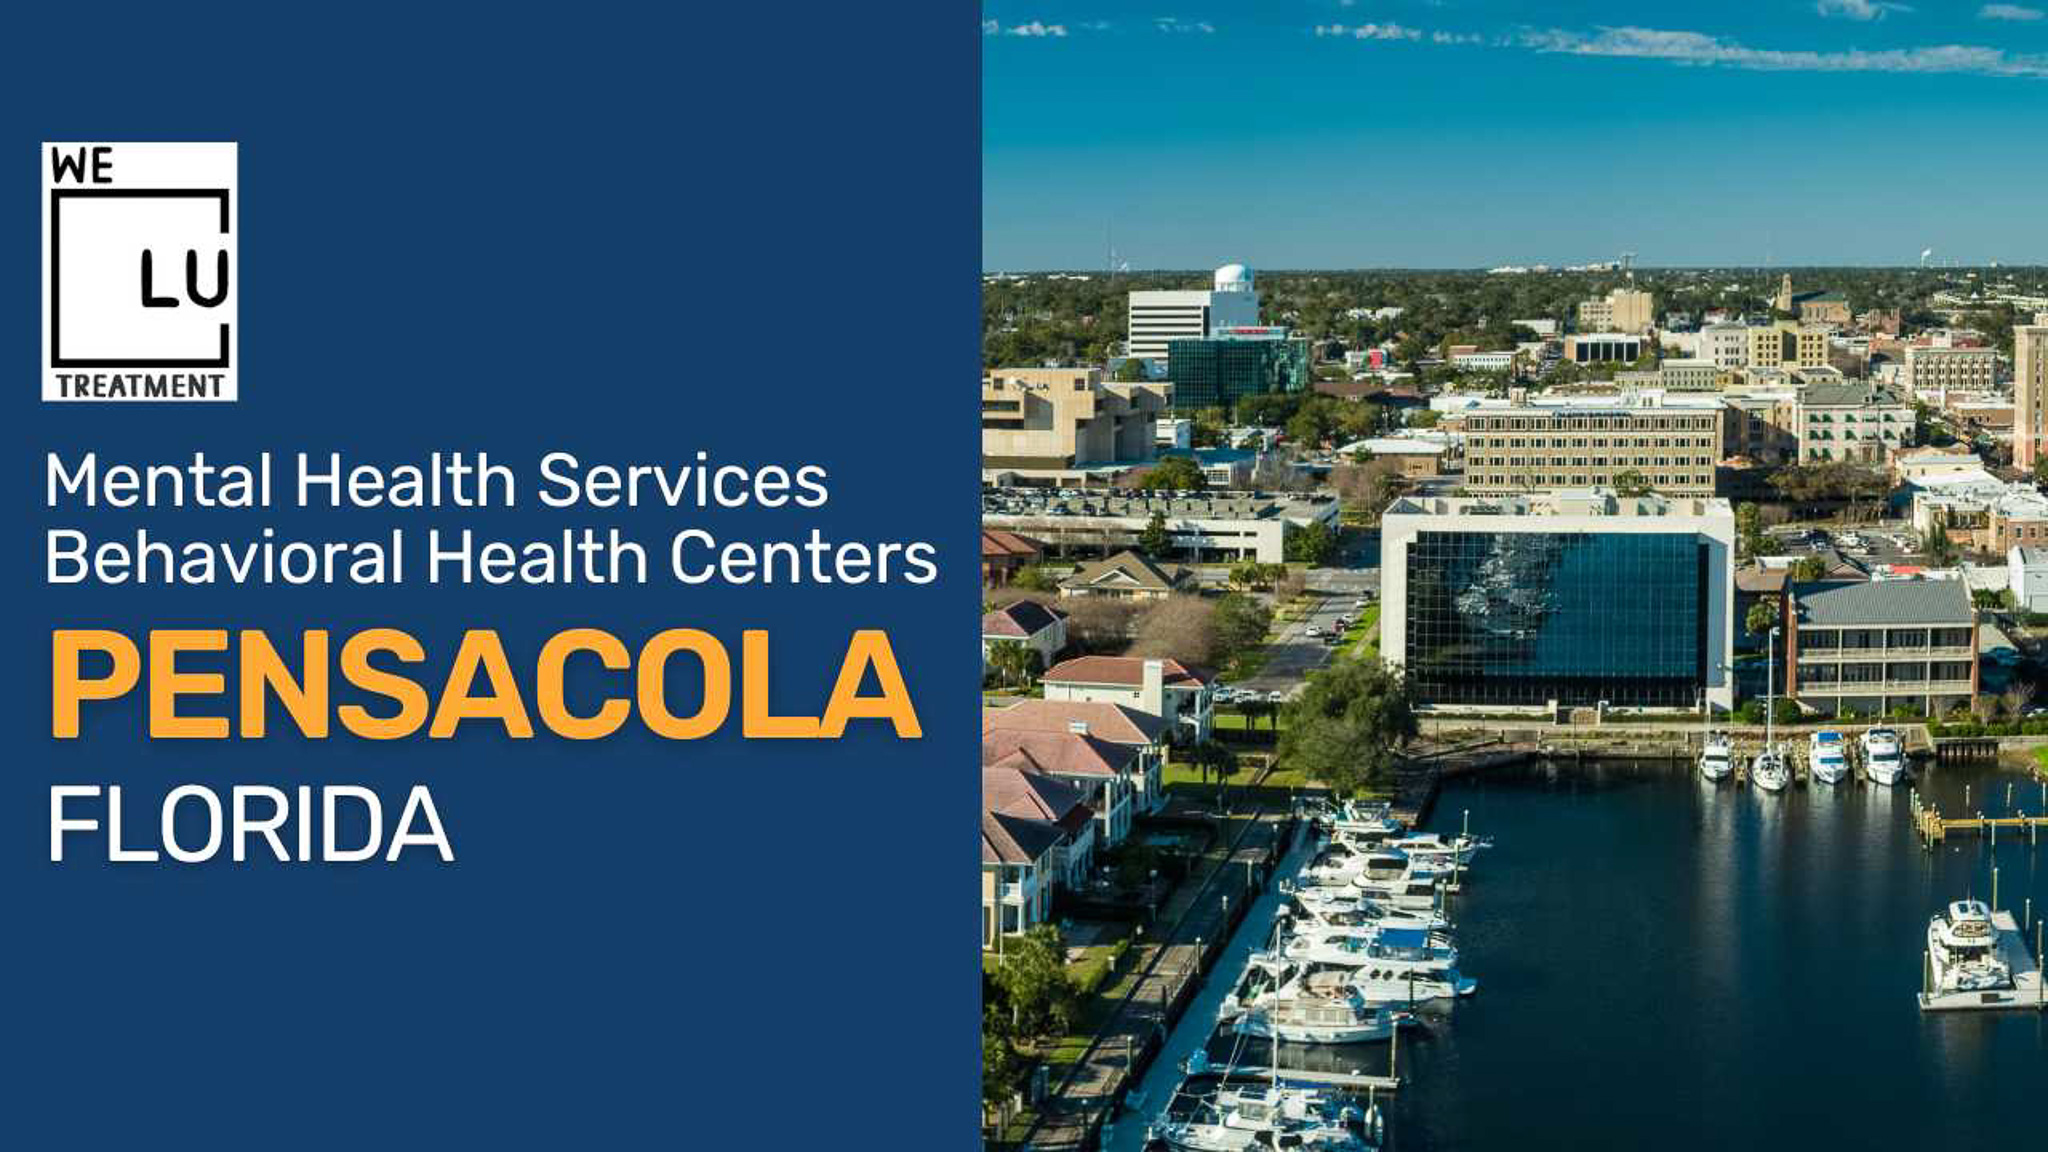 Pensacola FL (MH) We Level Up treatment center for drug and alcohol rehab detox and mental health services - Image 1